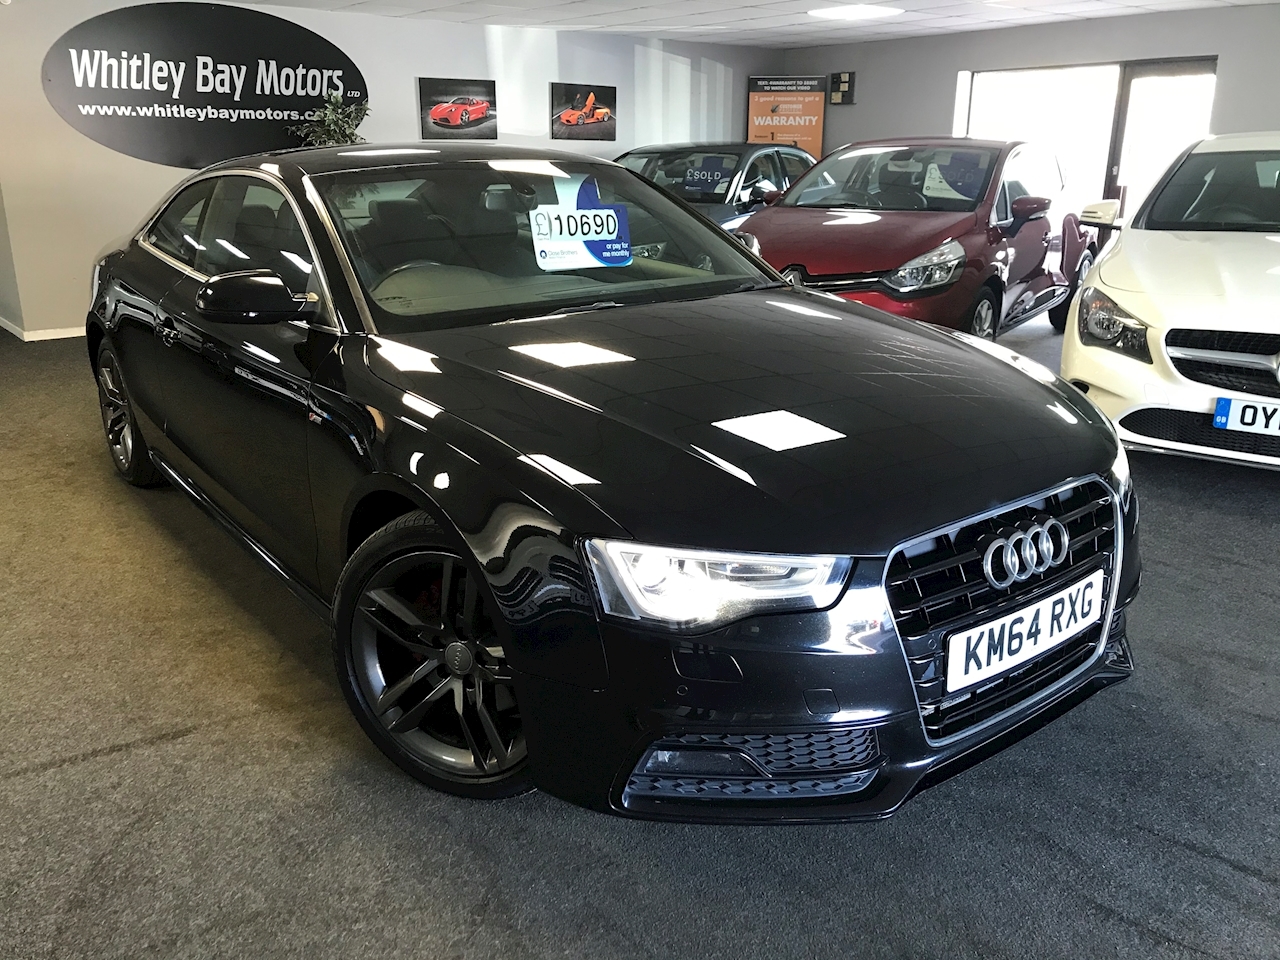 2.0 TDI S line Coupe 2dr Diesel Manual (120 g/km, 175 bhp)